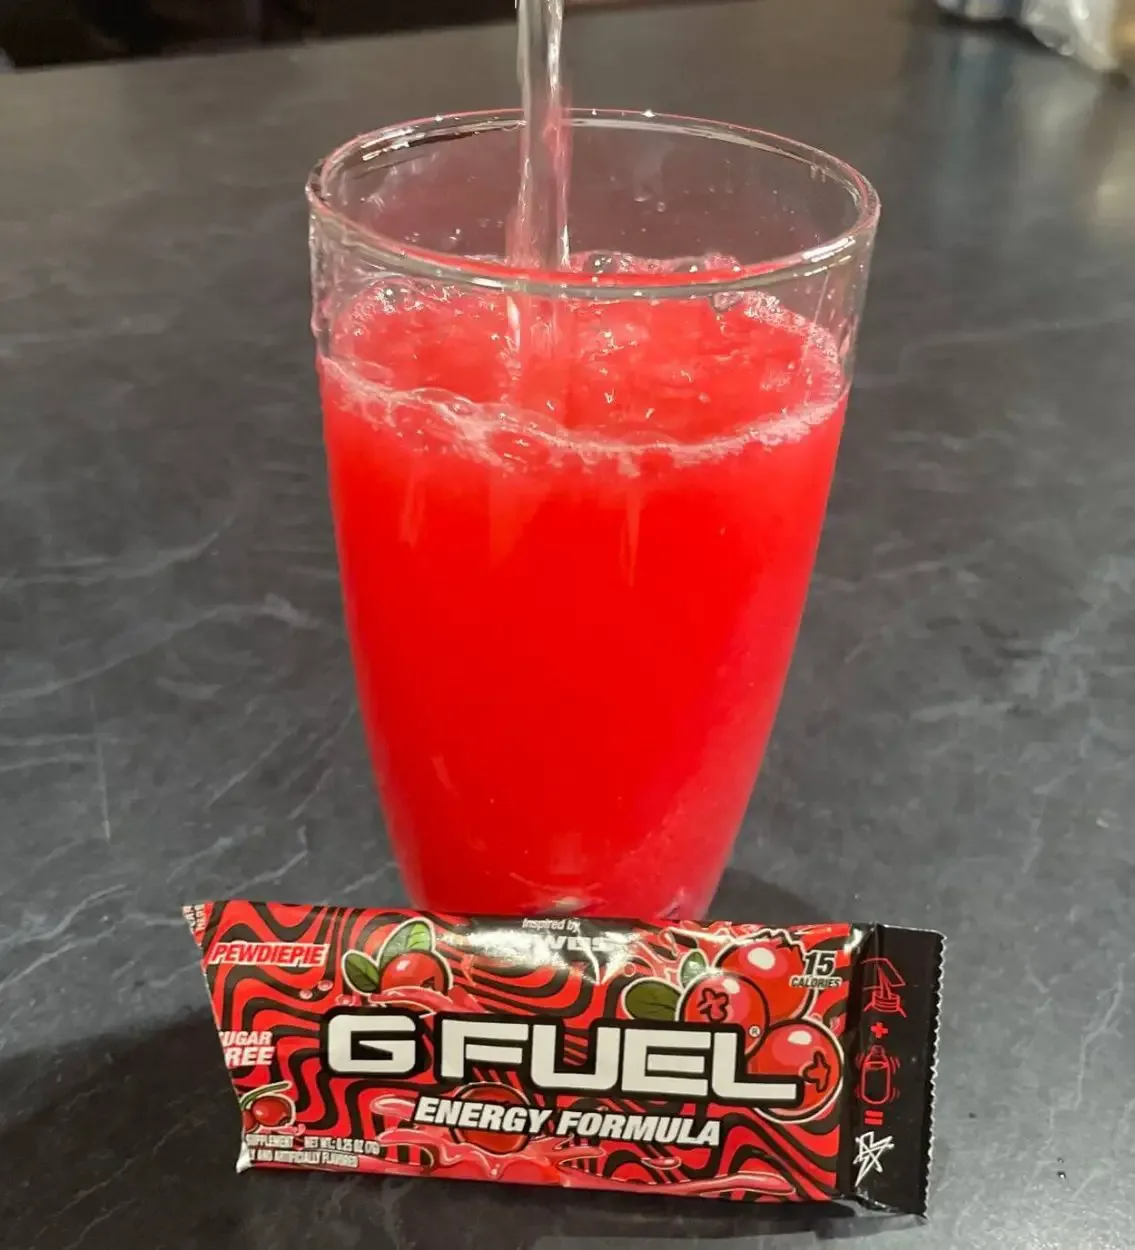 Pewds G Fuel flavor mixed in a glass